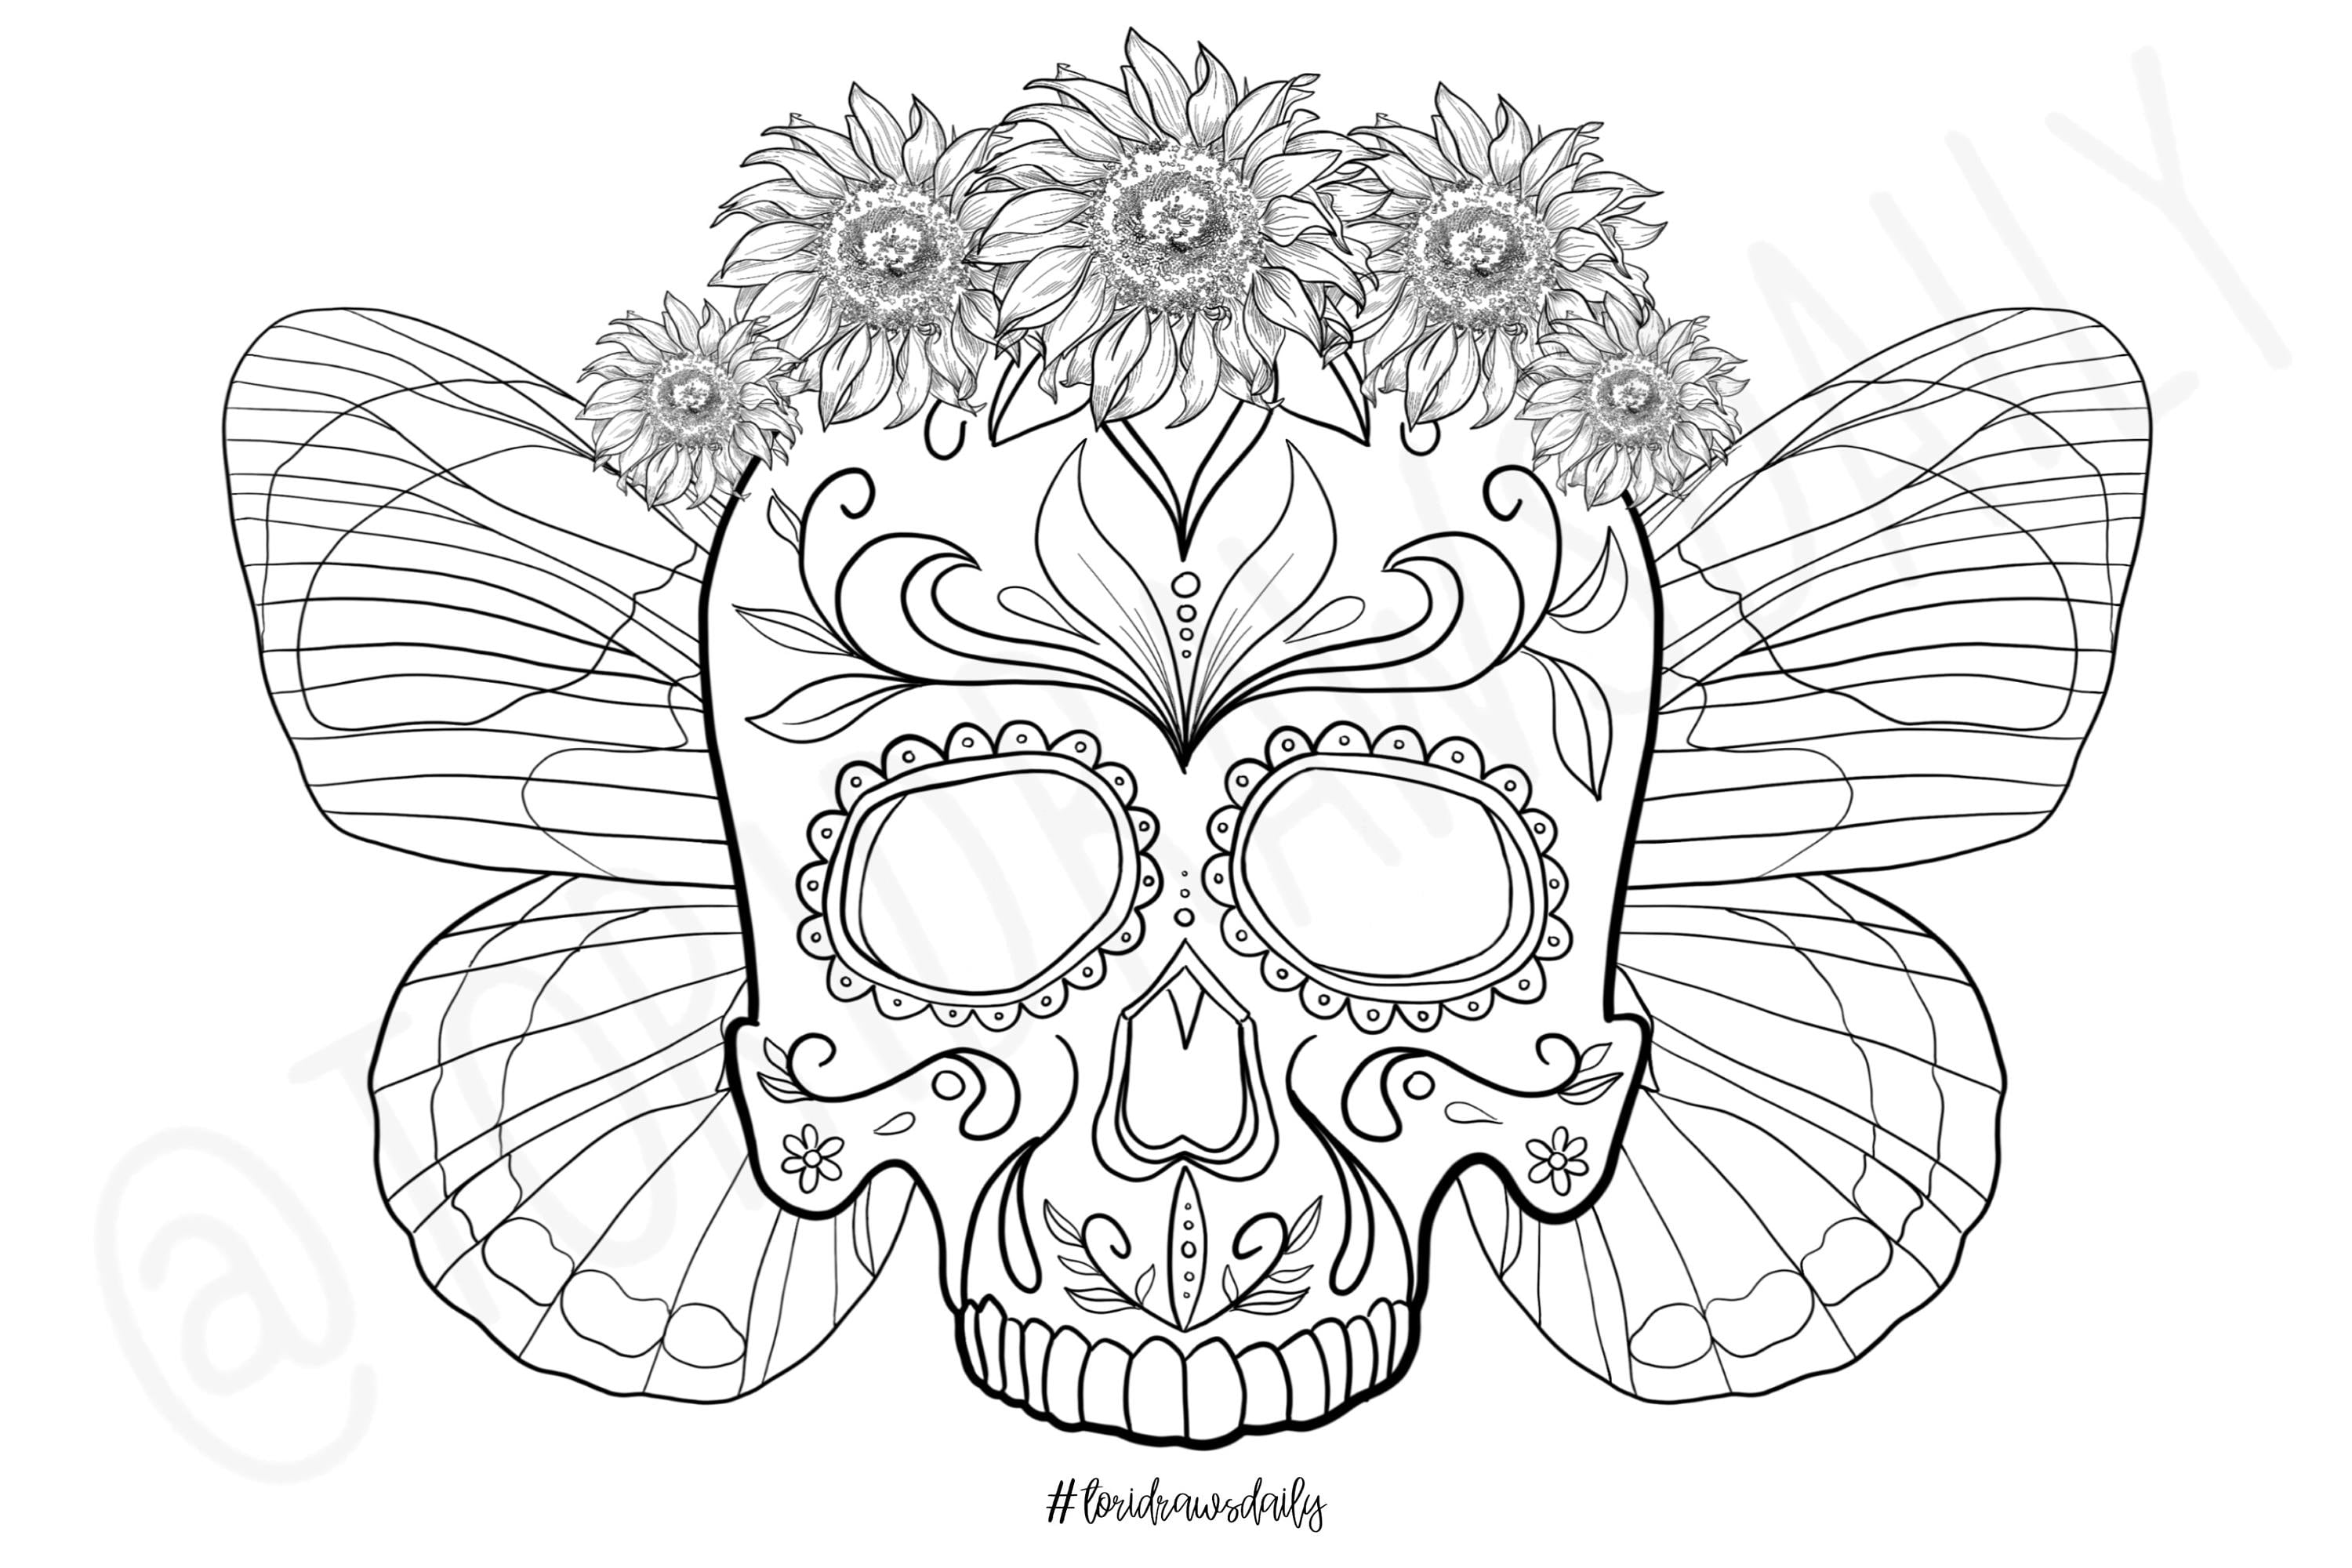 Skull Flower Crown with Butterfly Wings COLORING PAGE